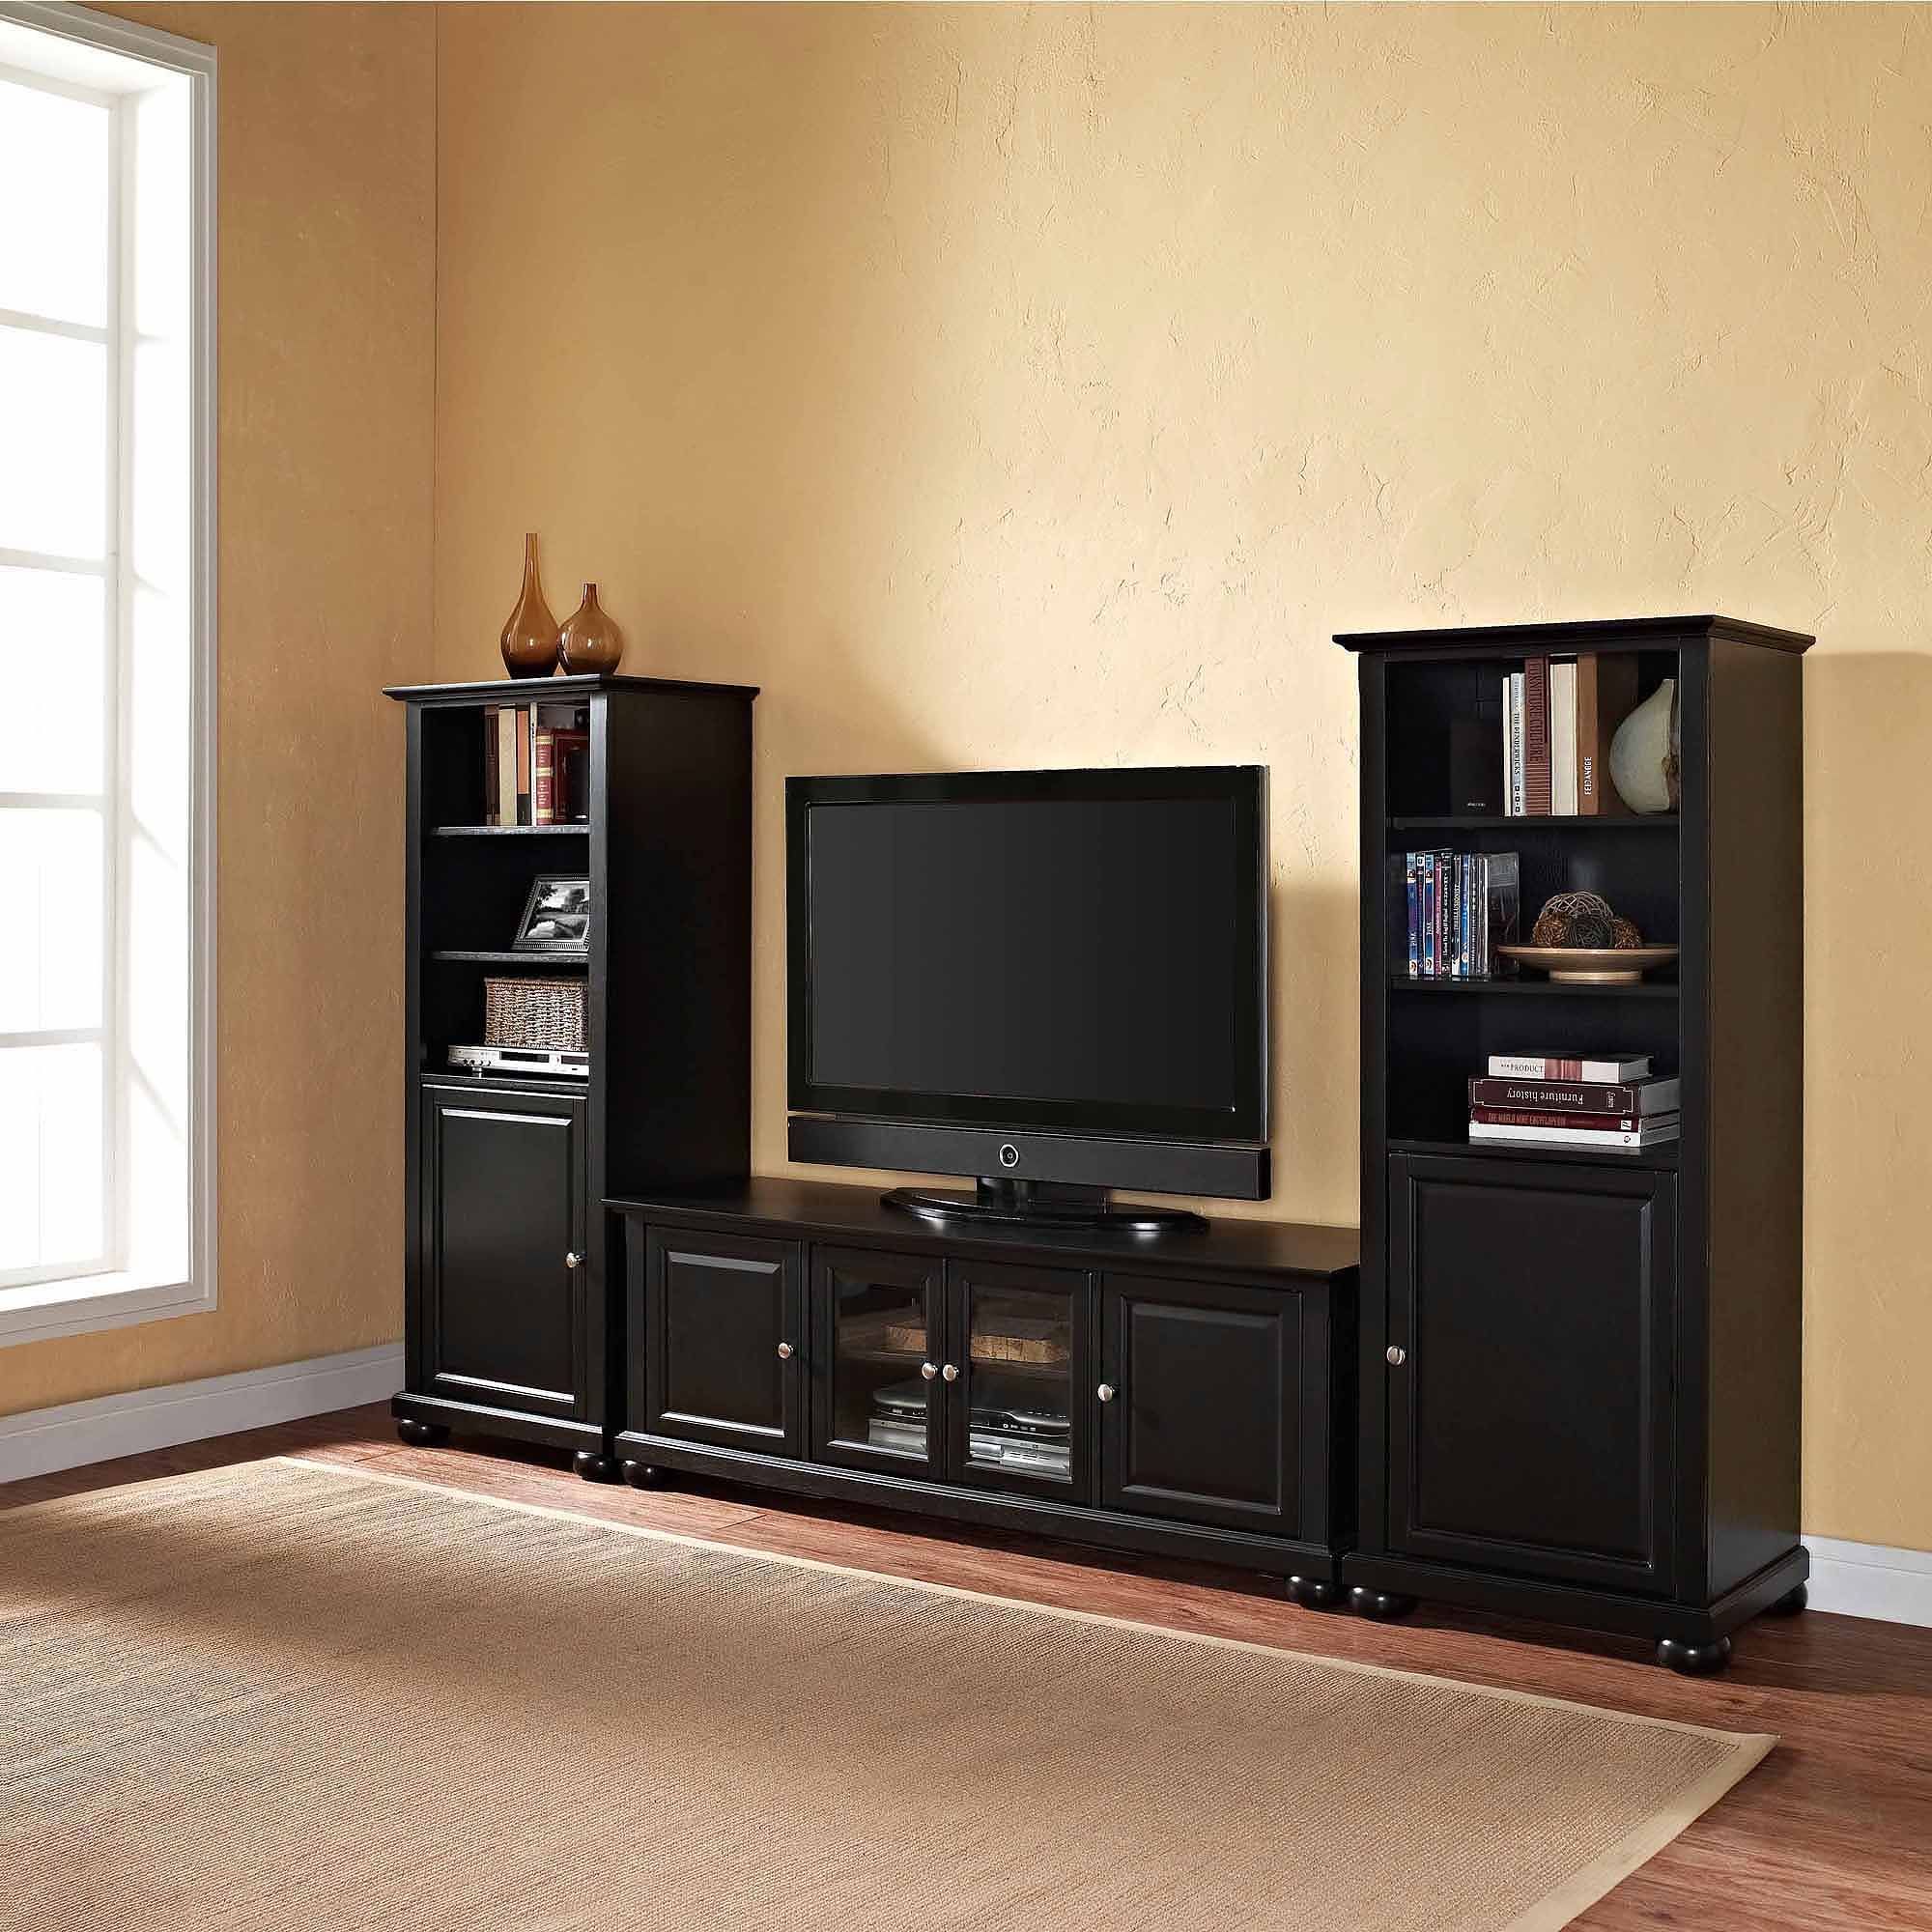 Mainstays Tv Stand For Tvs Up To 55", Multiple Finishes With Regard To Mainstays Parsons Tv Stands With Multiple Finishes (View 7 of 15)